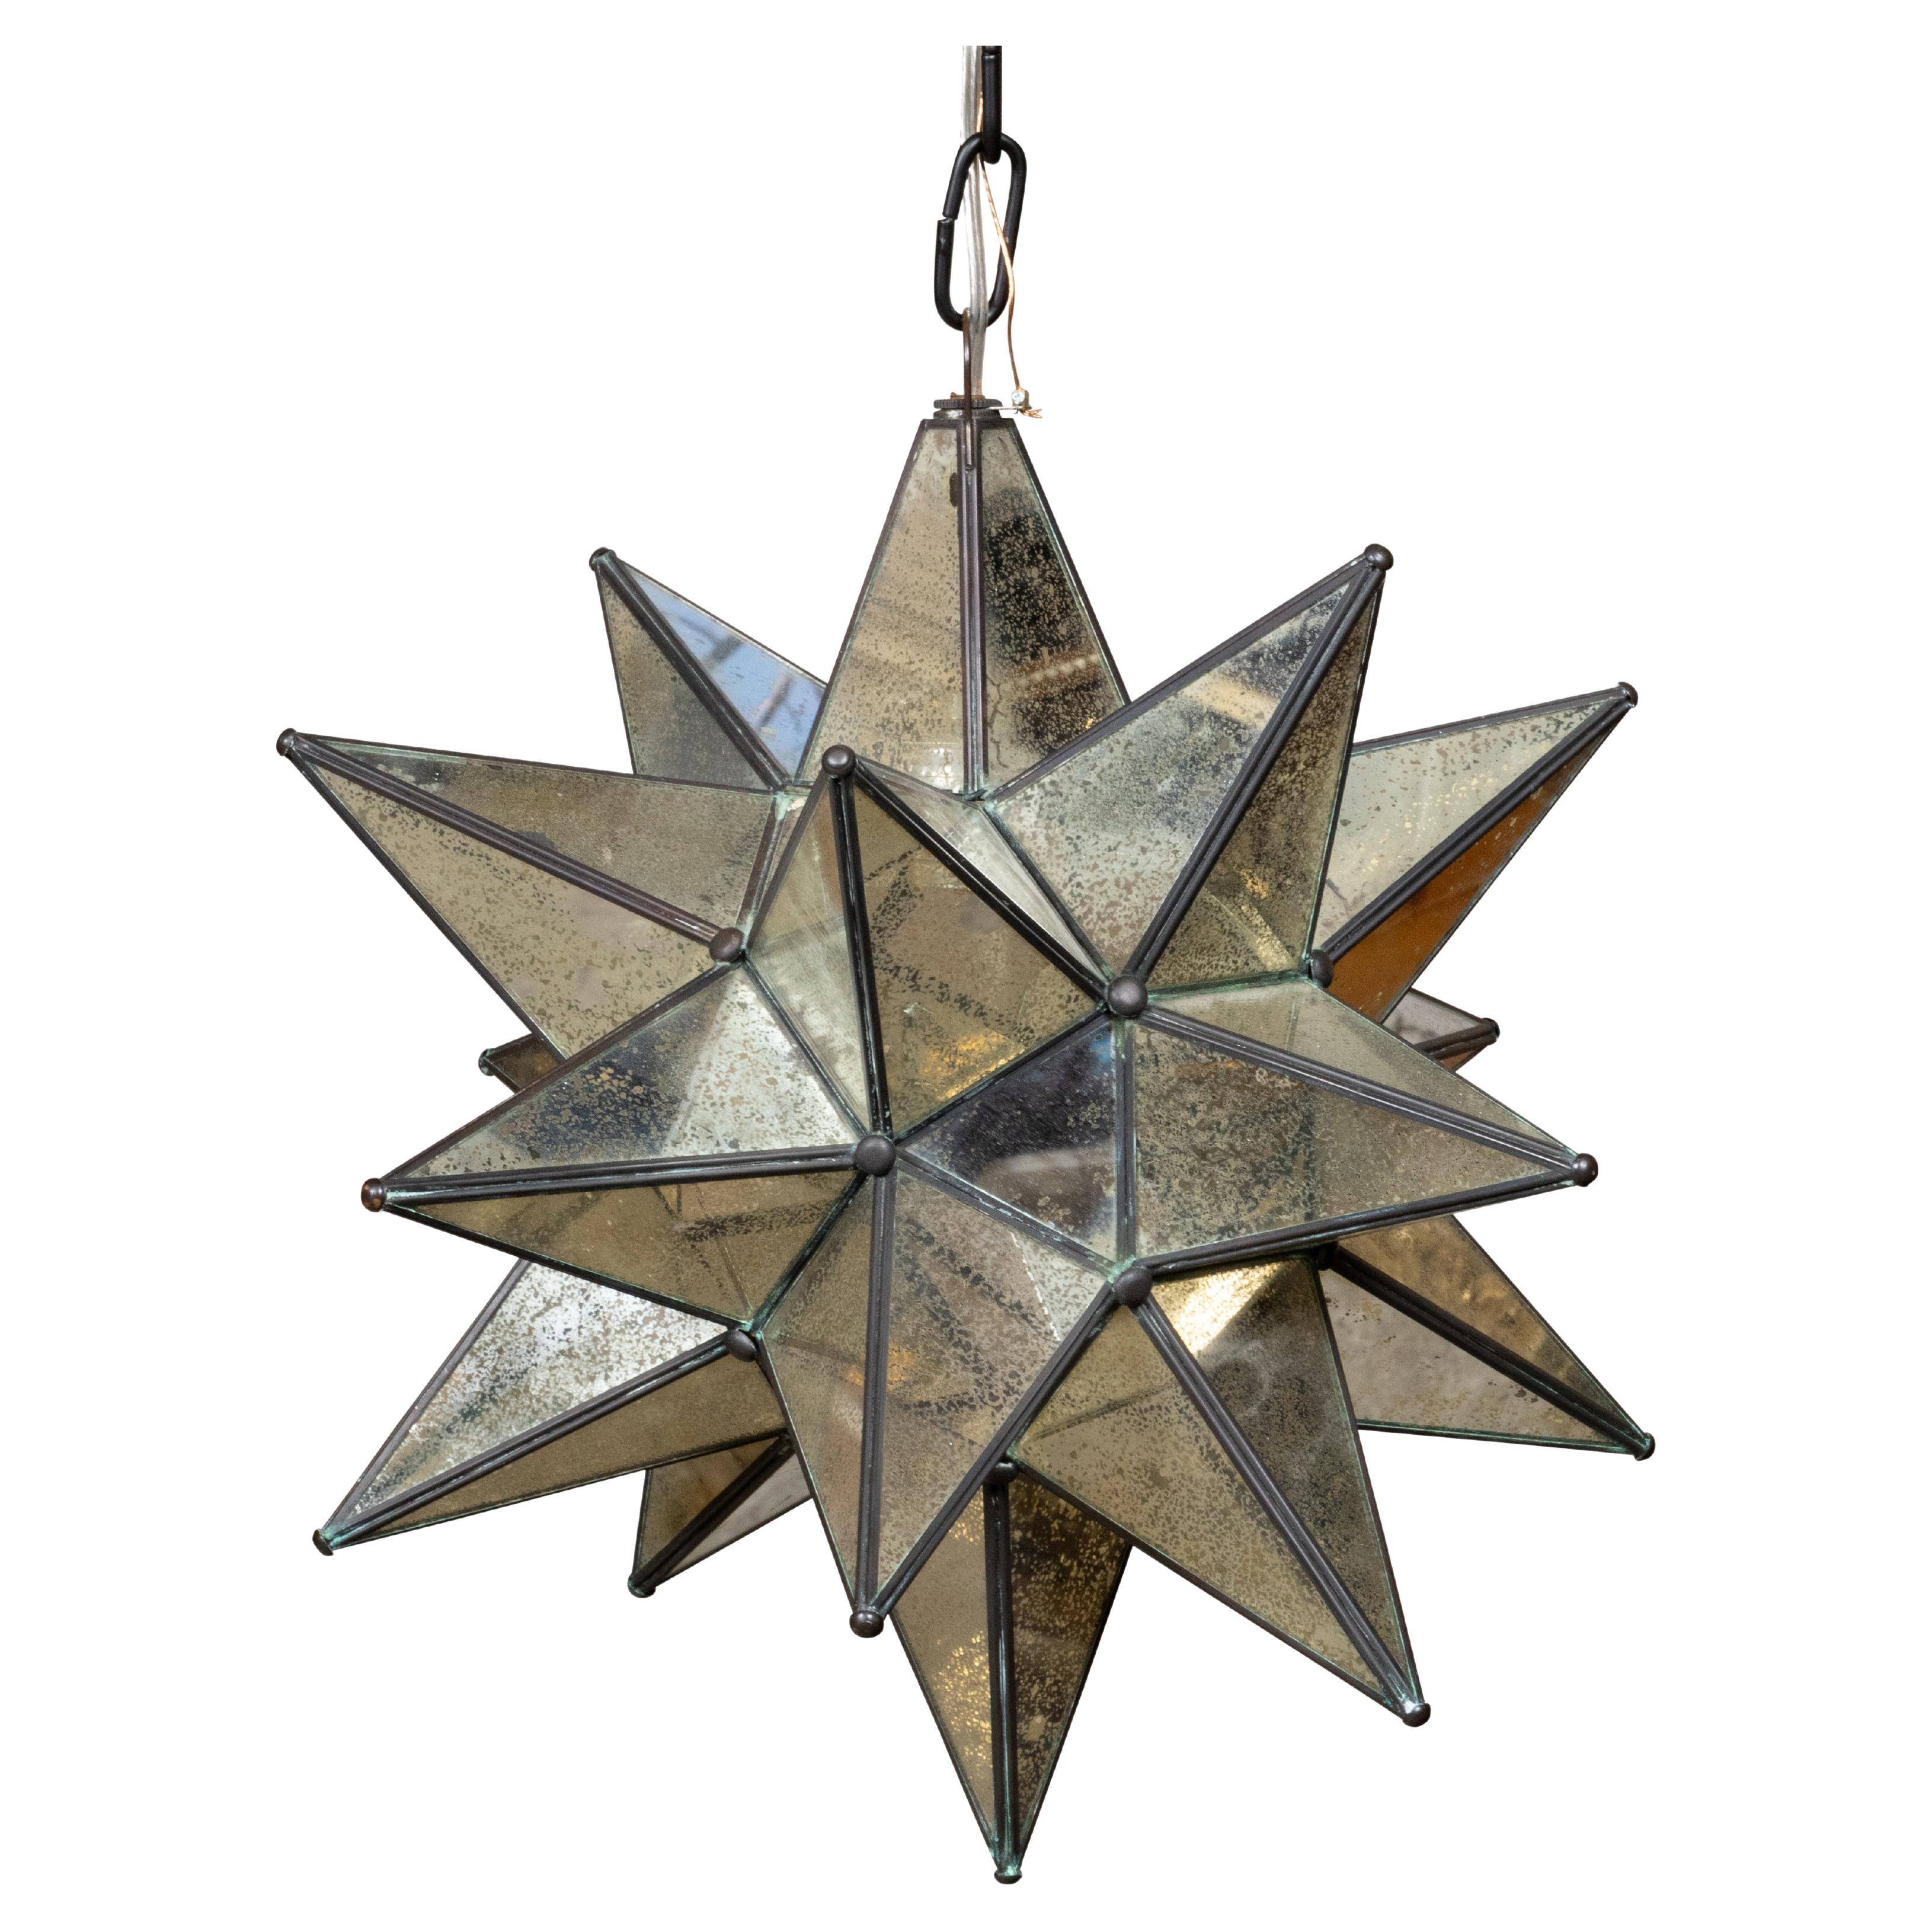 Midcentury French Star Shaped Light Fixture with Mirrored Panels, USA Wired